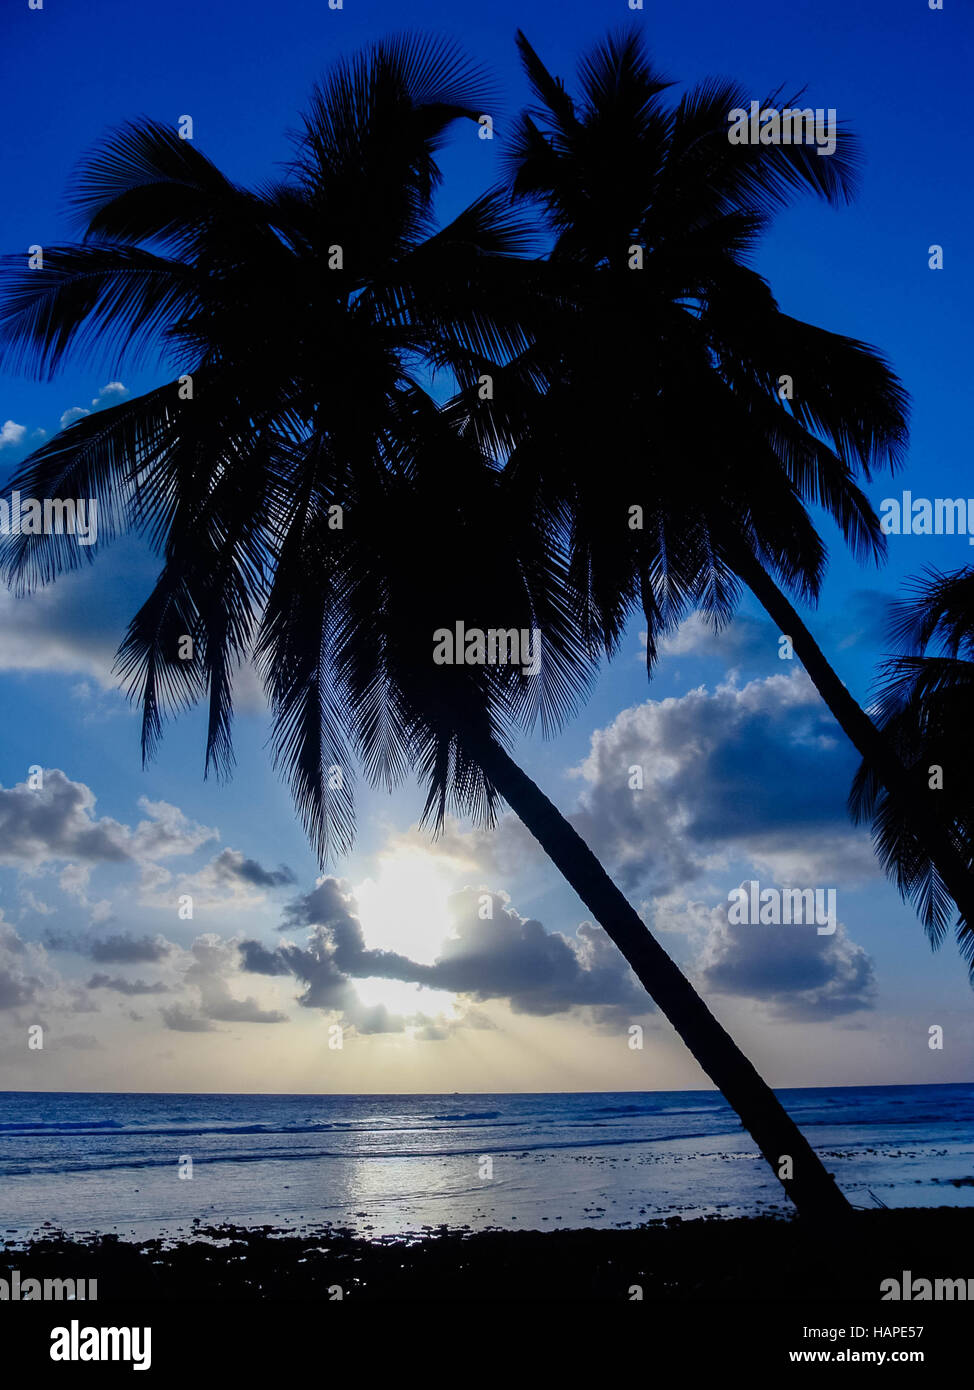 Palmtrees in a beautiful blue sunset with soft waves at the sea Stock Photo